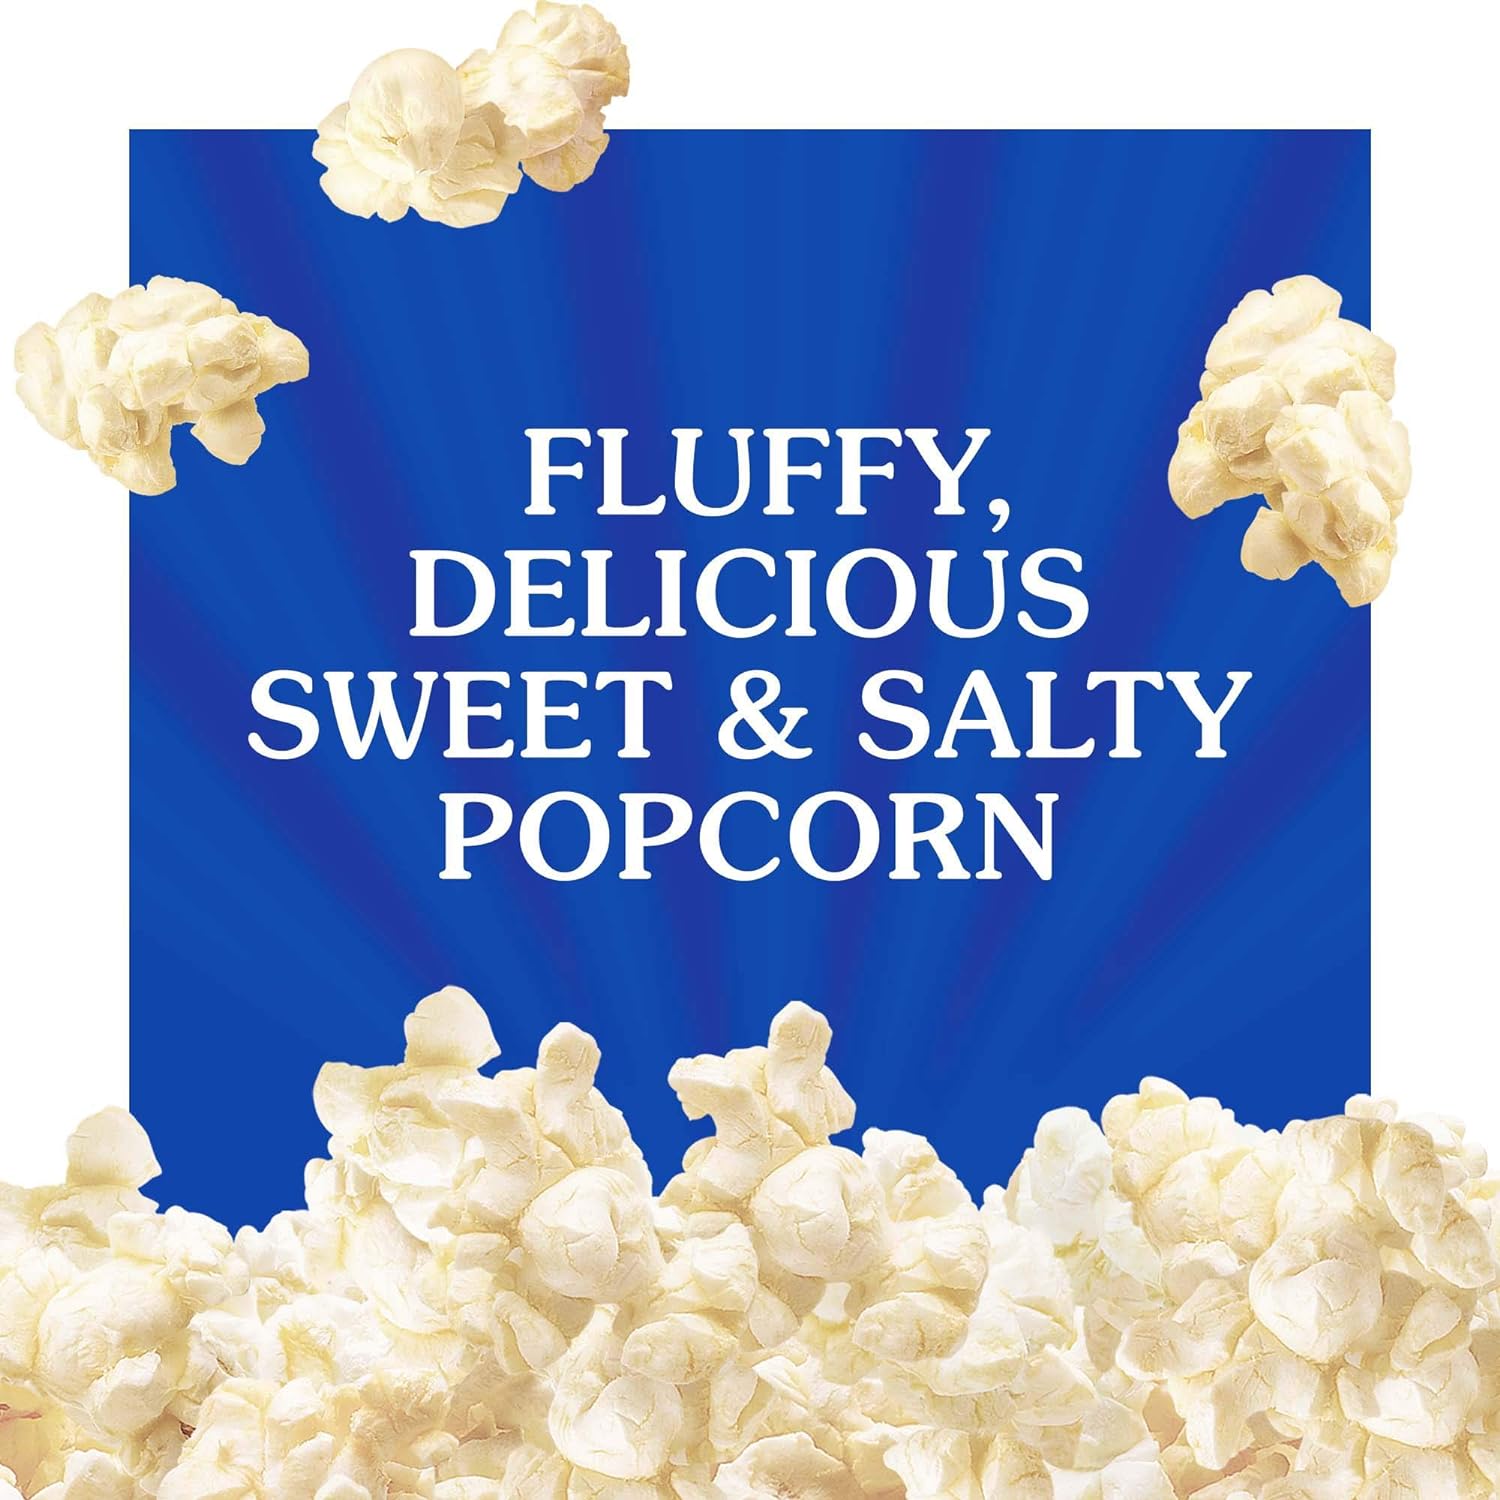 ACT II Popcorn With Butter, 2.75 Oz, 3 Ct